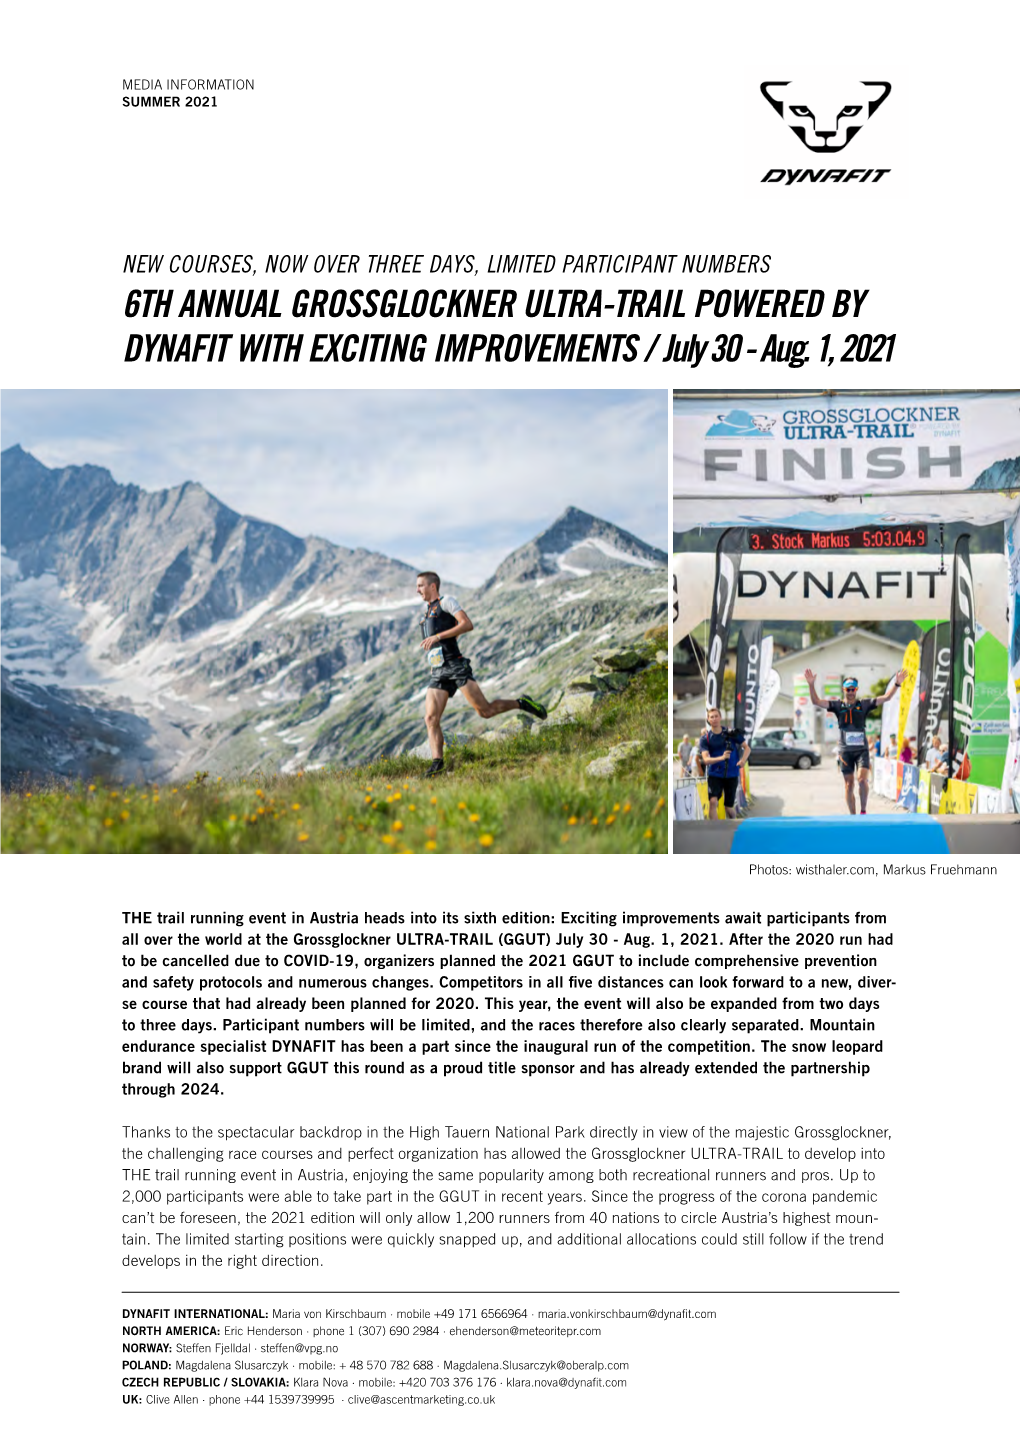 6TH ANNUAL GROSSGLOCKNER ULTRA-TRAIL POWERED by DYNAFIT with EXCITING IMPROVEMENTS / July 30 - Aug